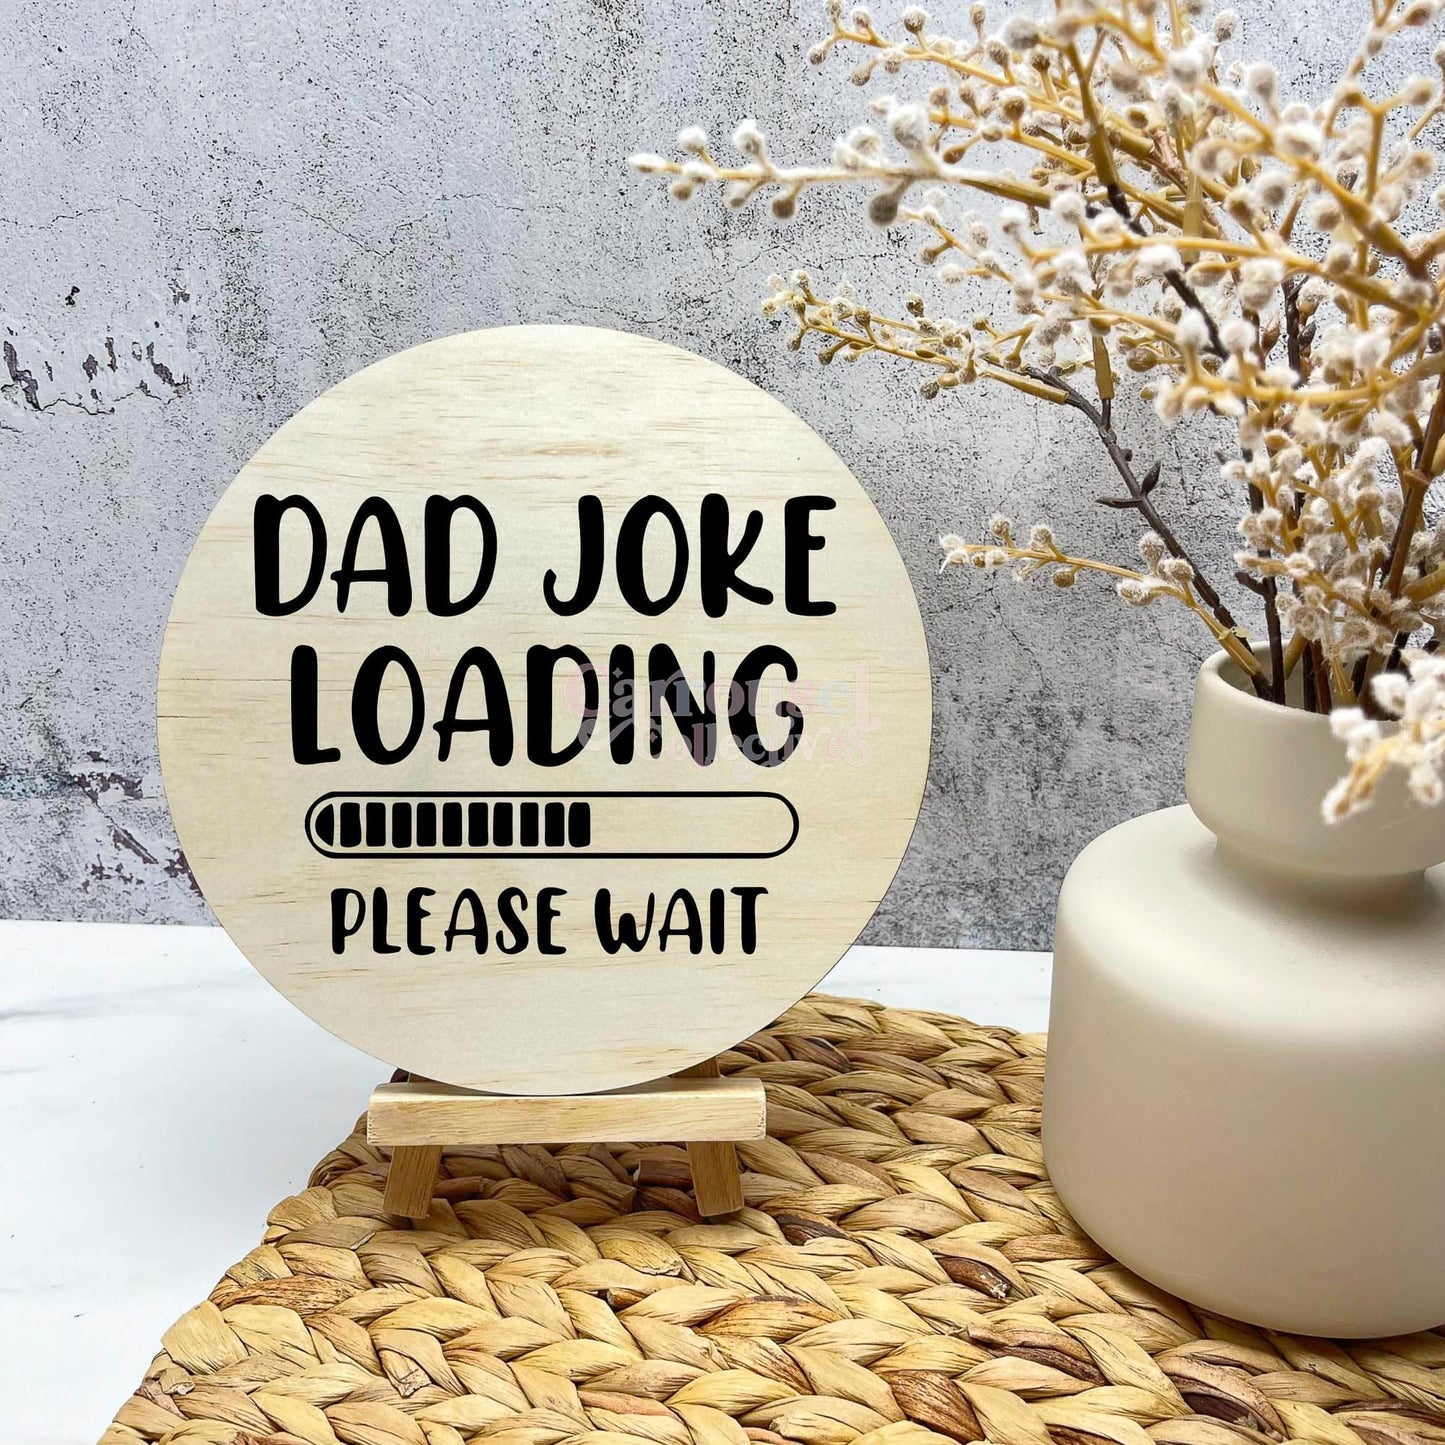 Dad joke loading Sign, Fathers day gifts, printed fathers day signs, Gifts for dad 161